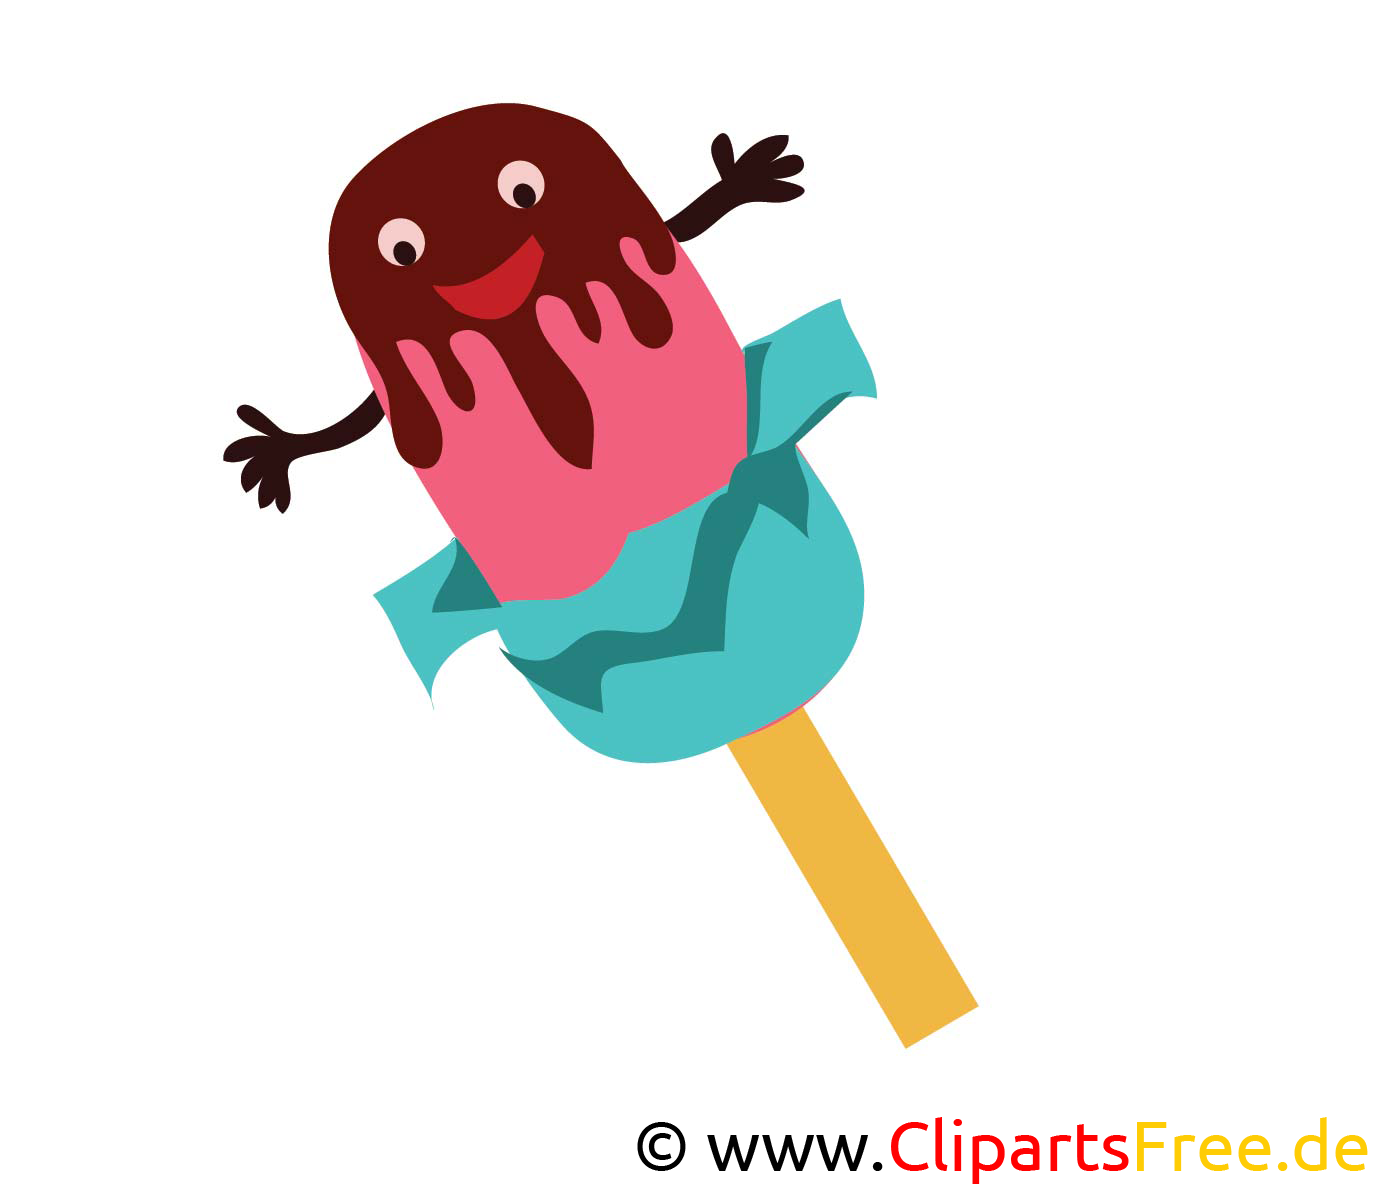 Glace image - Nourriture images cliparts